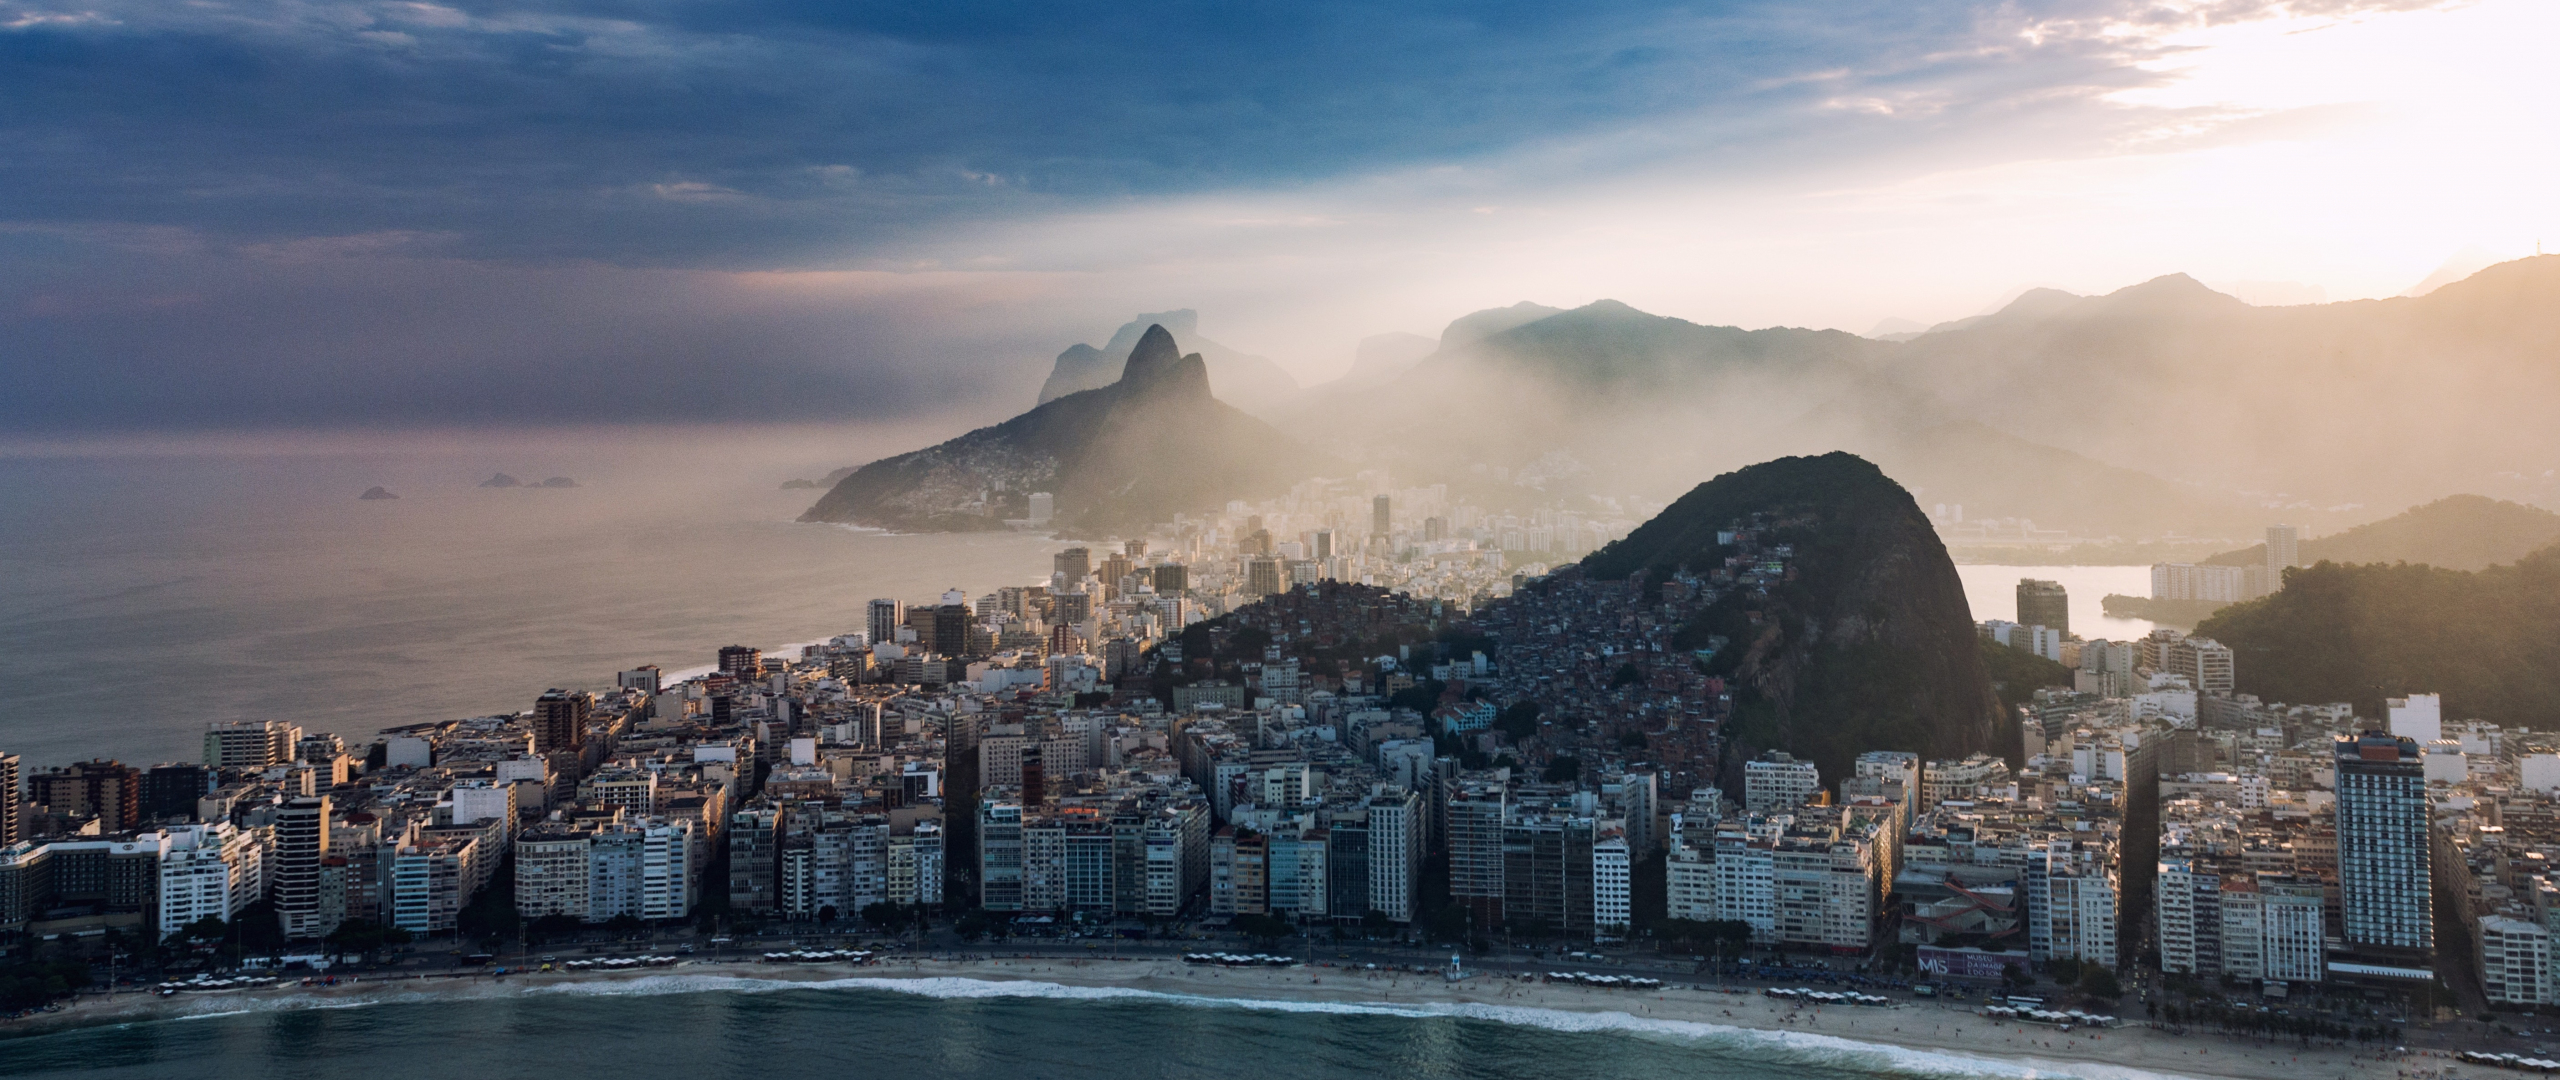 2560x1080 Download rio de janeiro, city, buildings and mountains, aerial view wallpaper, dual wide hd image, background, 8710